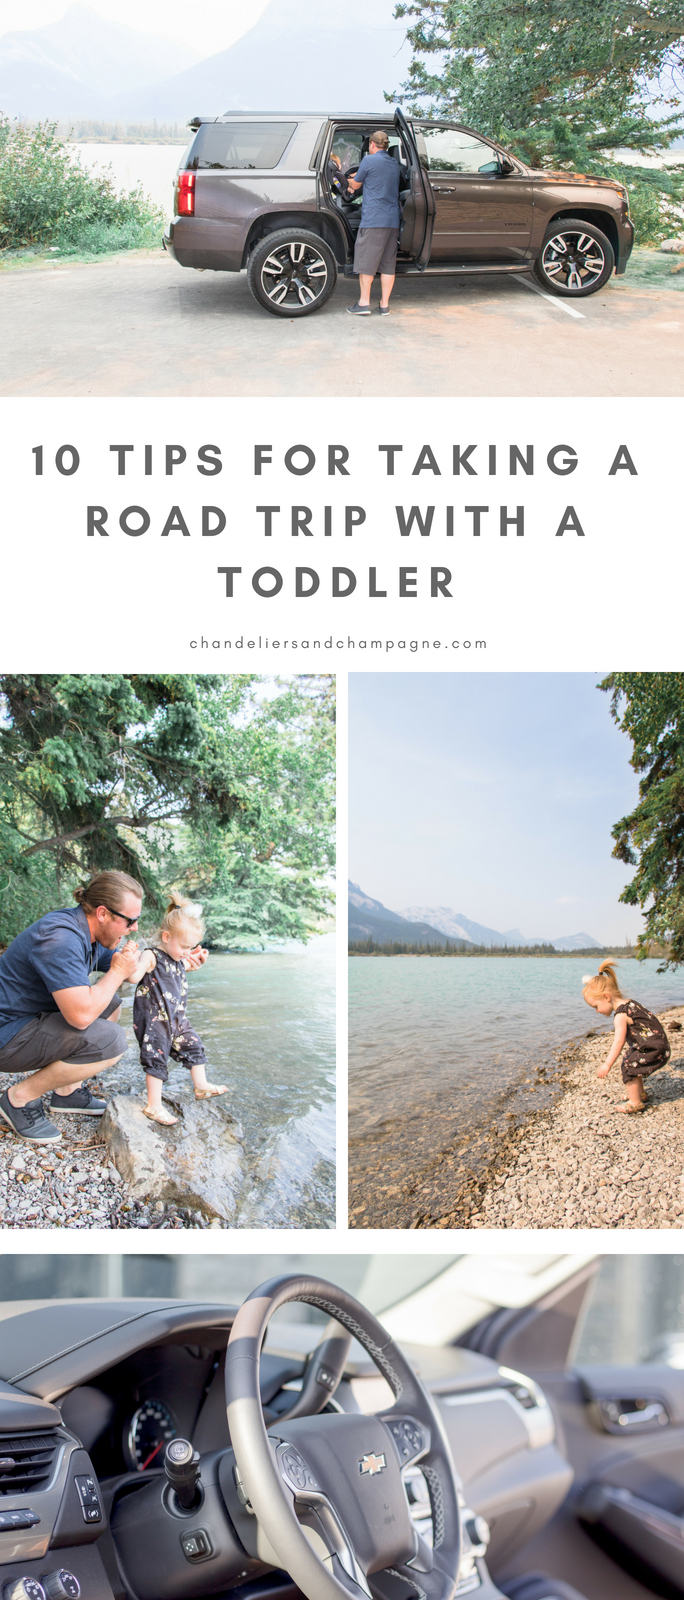 10 tips for taking a road trip with a toddler - how to take a family road trip - road trip ideas with toddlers